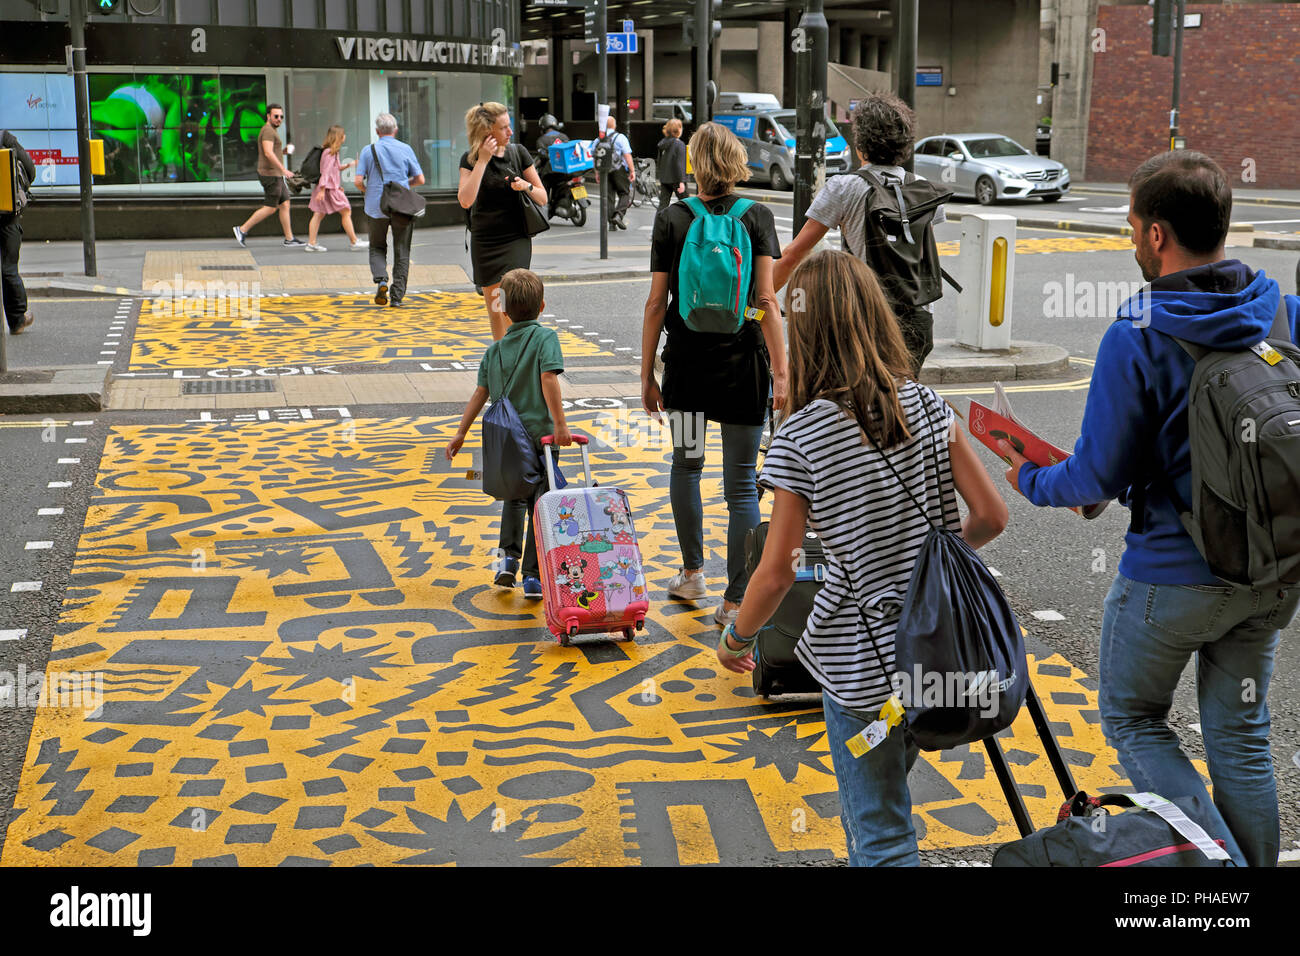 Family with luggage on Eley Kishimoto art 'Colourful Crossings'  Beech Street Tunnel & Barbican Station, Culture Mile,  City of London UK KATHY DEWITT Stock Photo